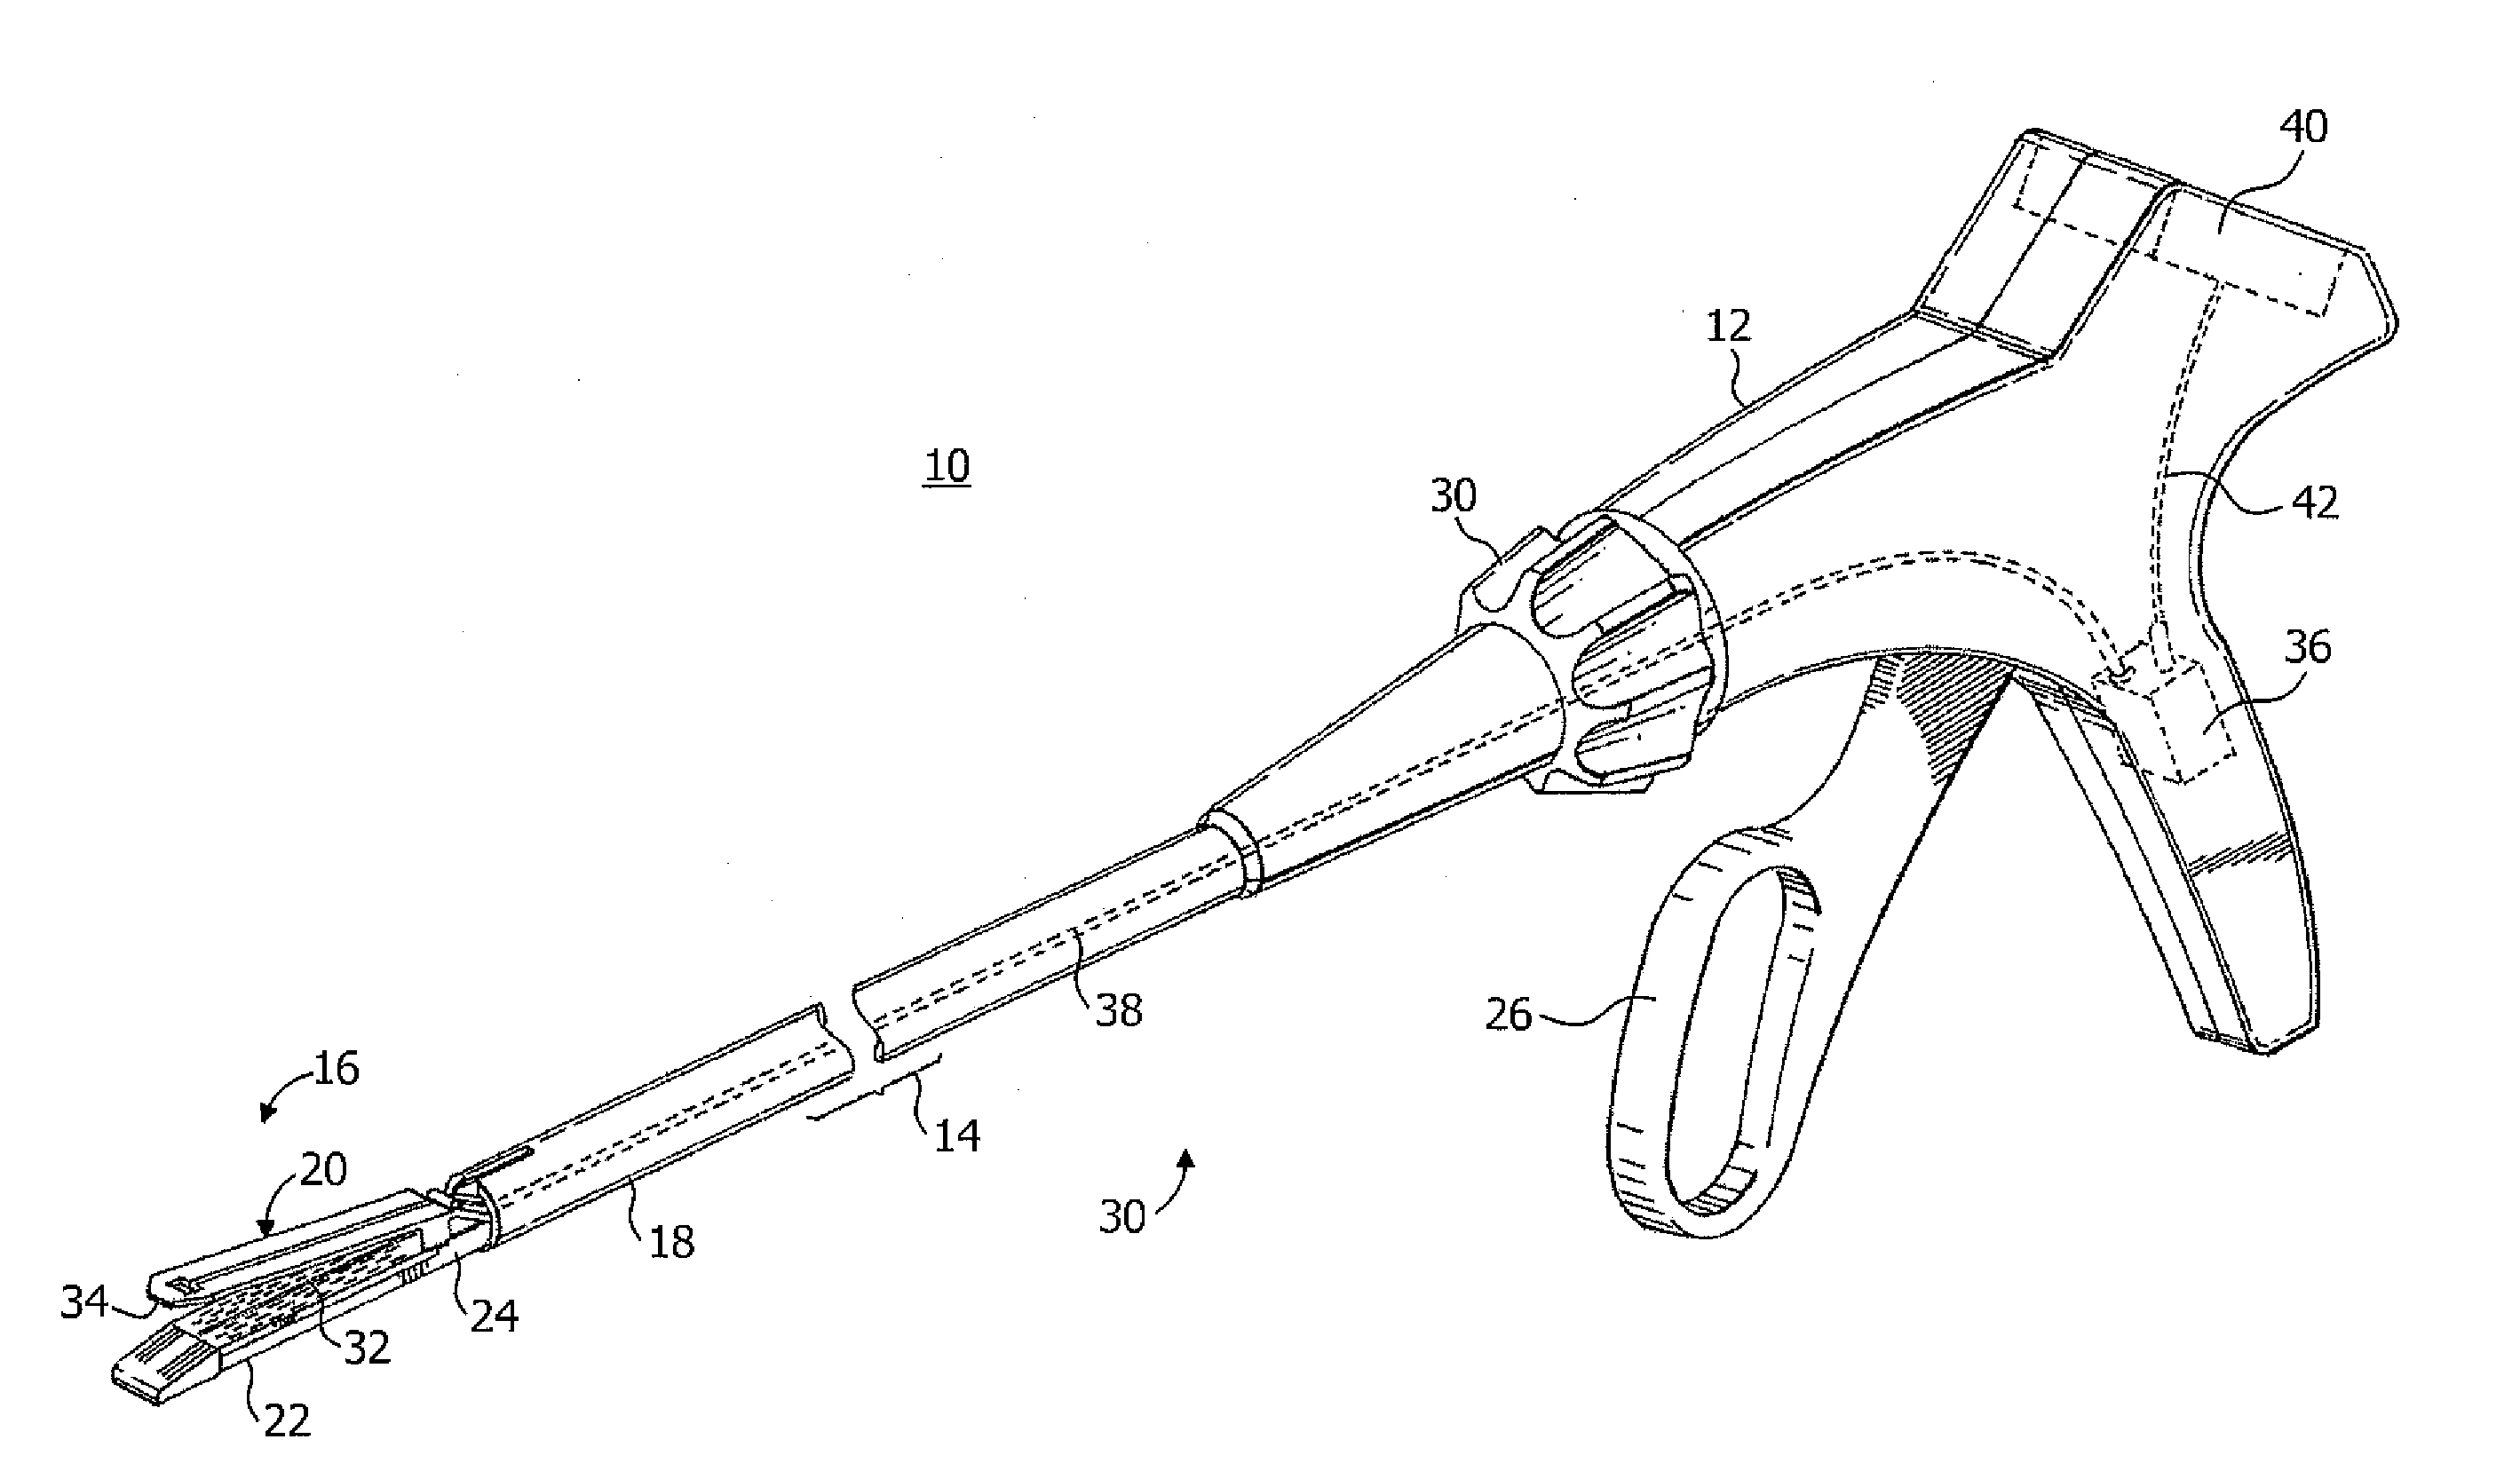 Staple formation recognition for a surgical device